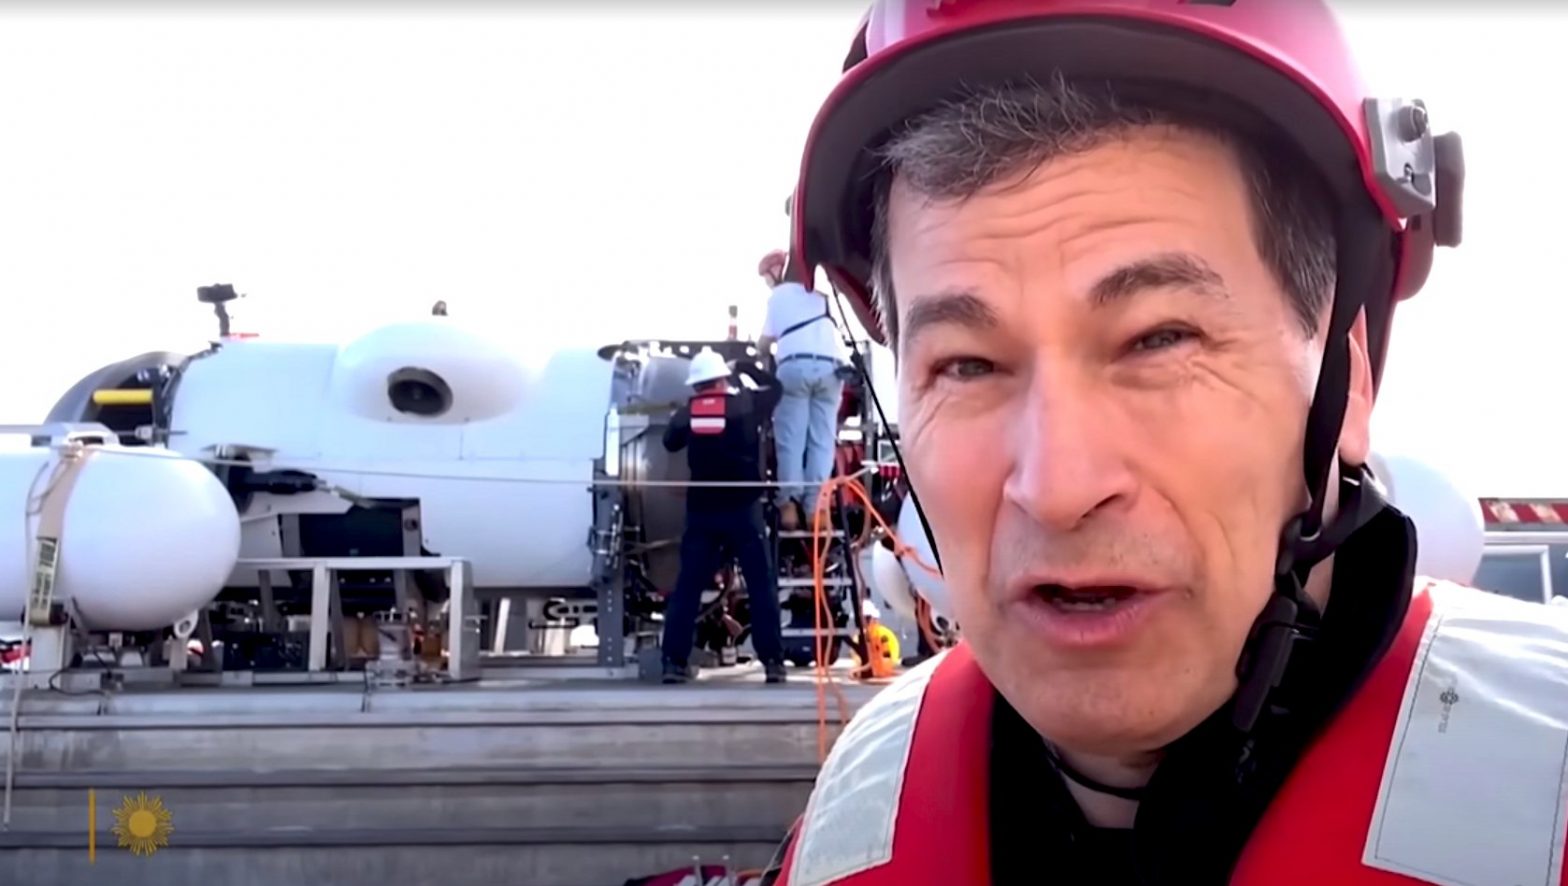 Who is David Pogue, CBS reporter who visited OceanGate’s operations last year?